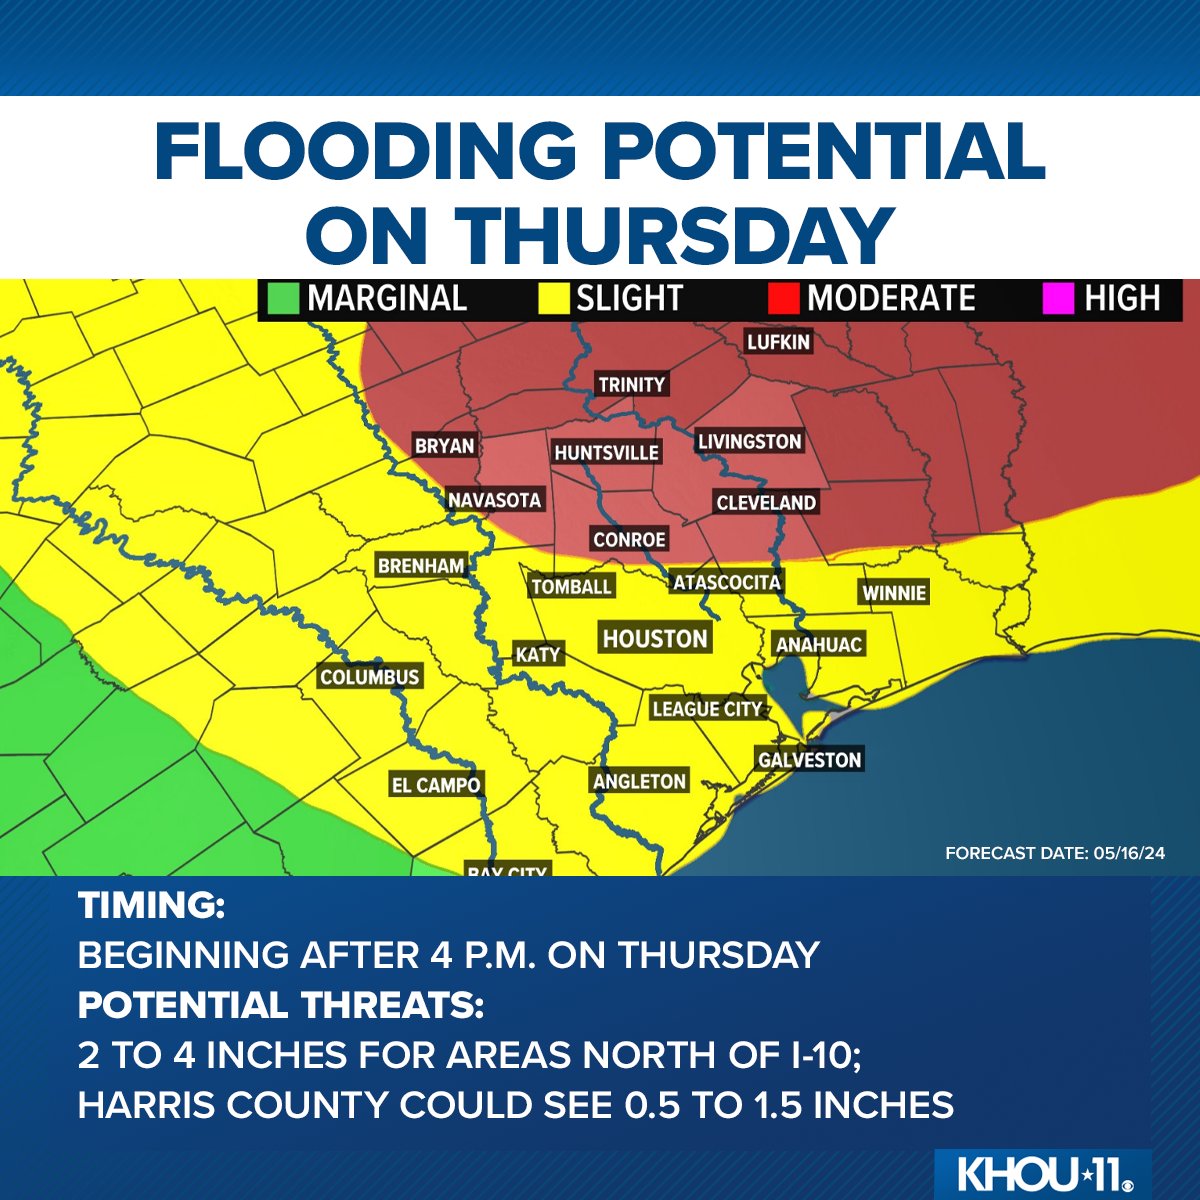 FLOOD THREAT | Storms could bring 2 to 4 inches of rainfall to areas north of I-10 beginning on Thursday afternoon. Most of the Houston area is under a slight risk, but communities further north face a moderate risk. Check the full forecast: khou.com/article/weathe…